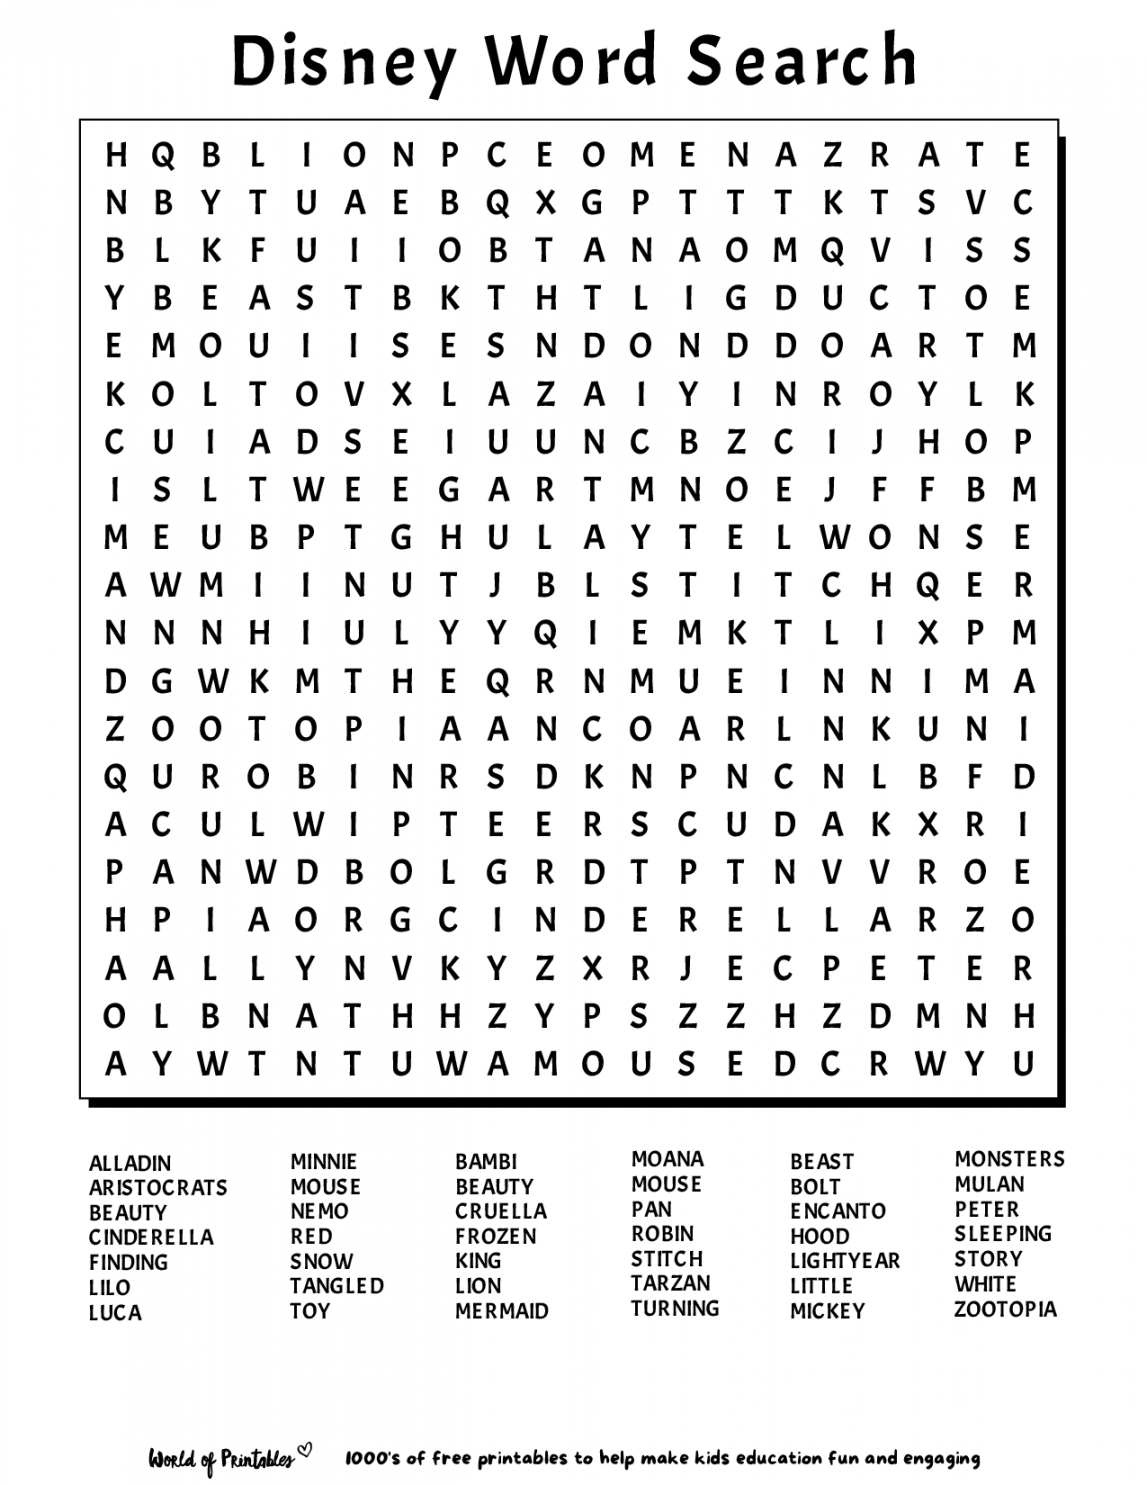 Word Search Puzzles Free Printable - Printable - Printable Word Search  World of Printables